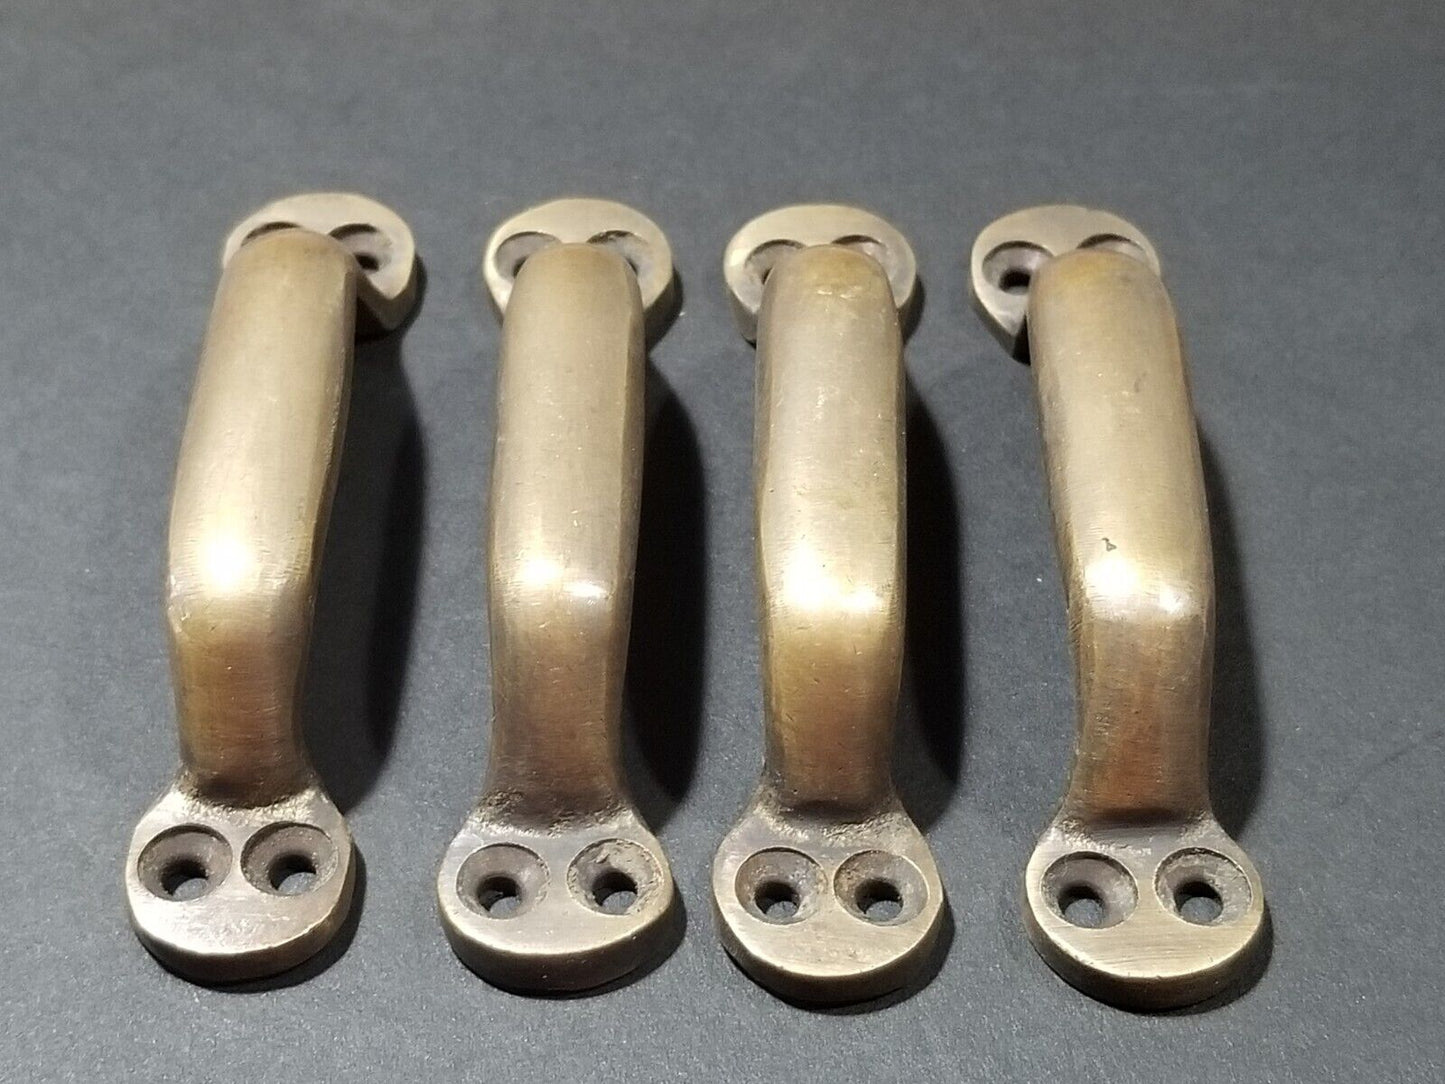 4 Solid Brass Antique Style File Cabinet Trunk Handles, 3-7/8"w. Strong #P2